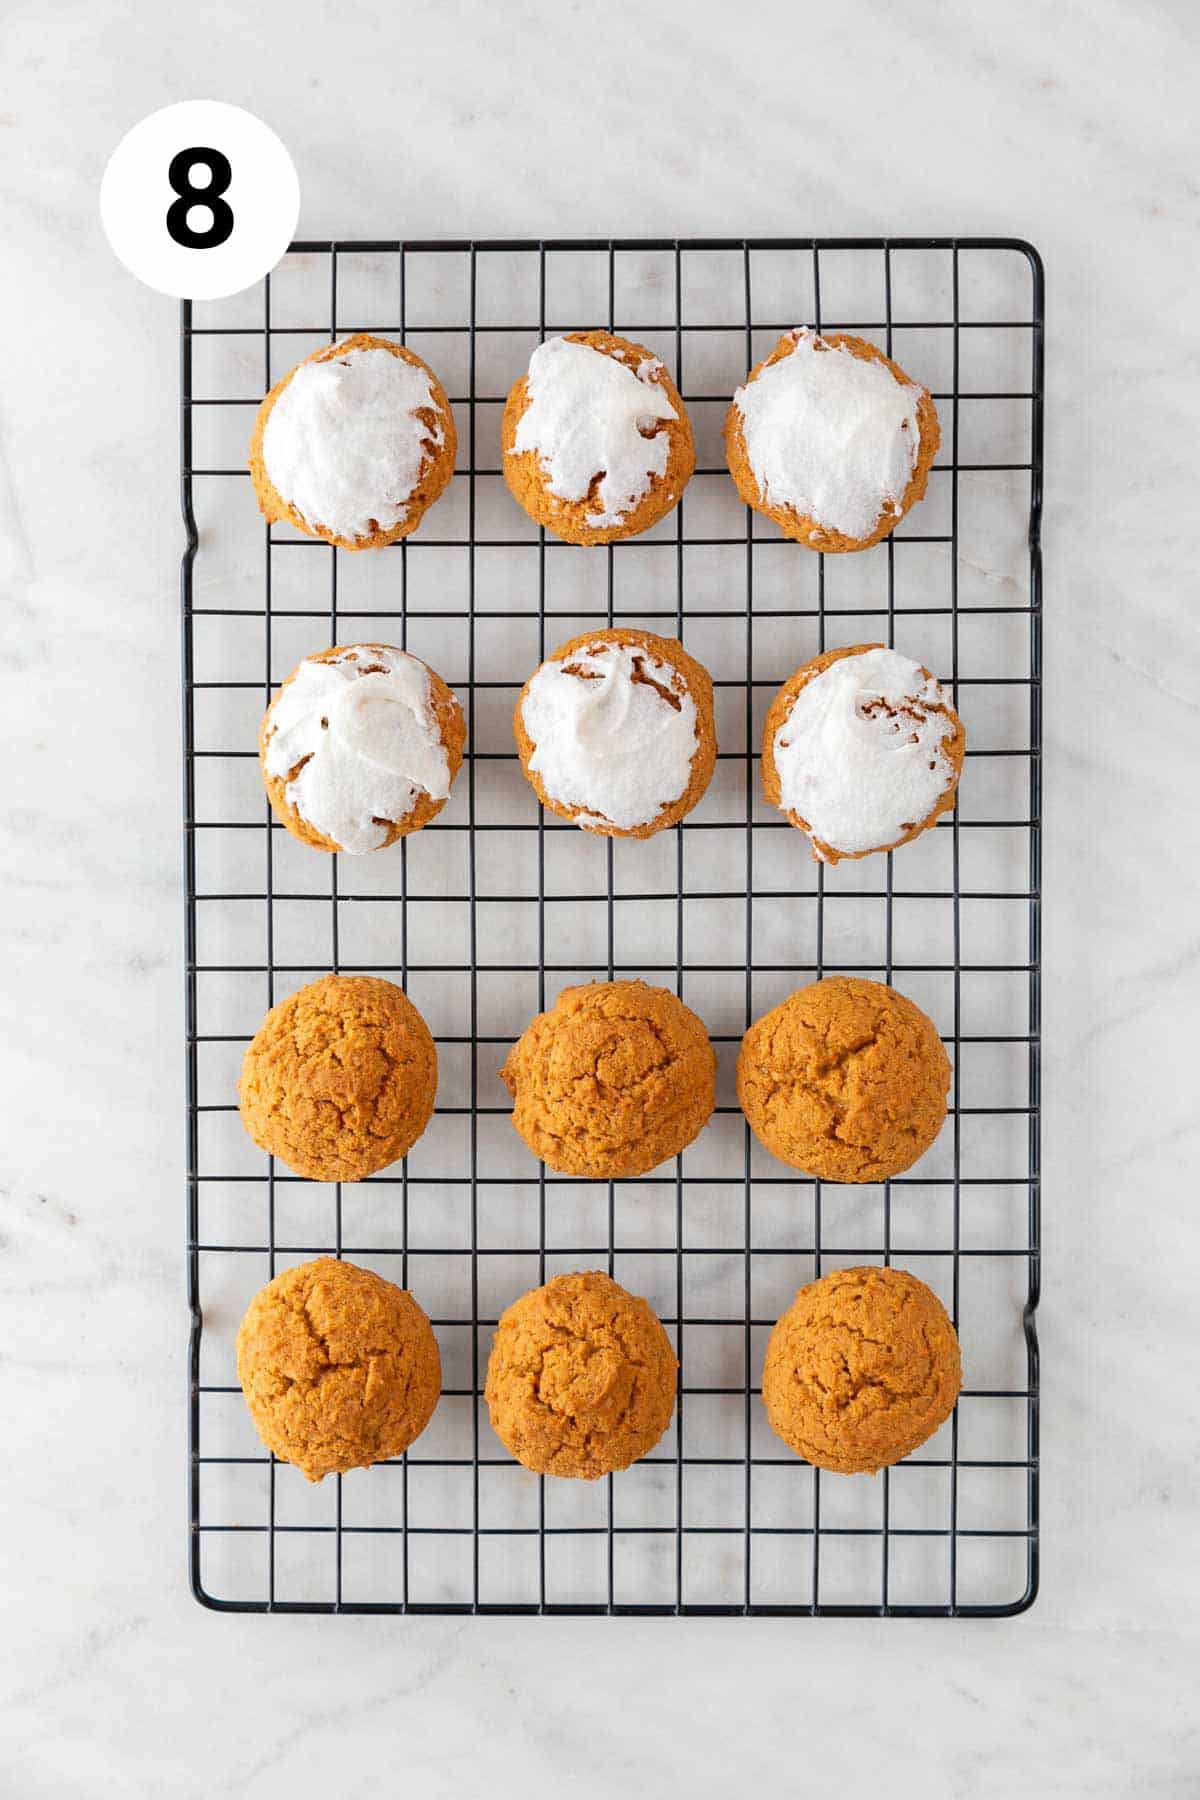 Baked vegan pumpkin cookies onto a cooling rack, some with frosting.